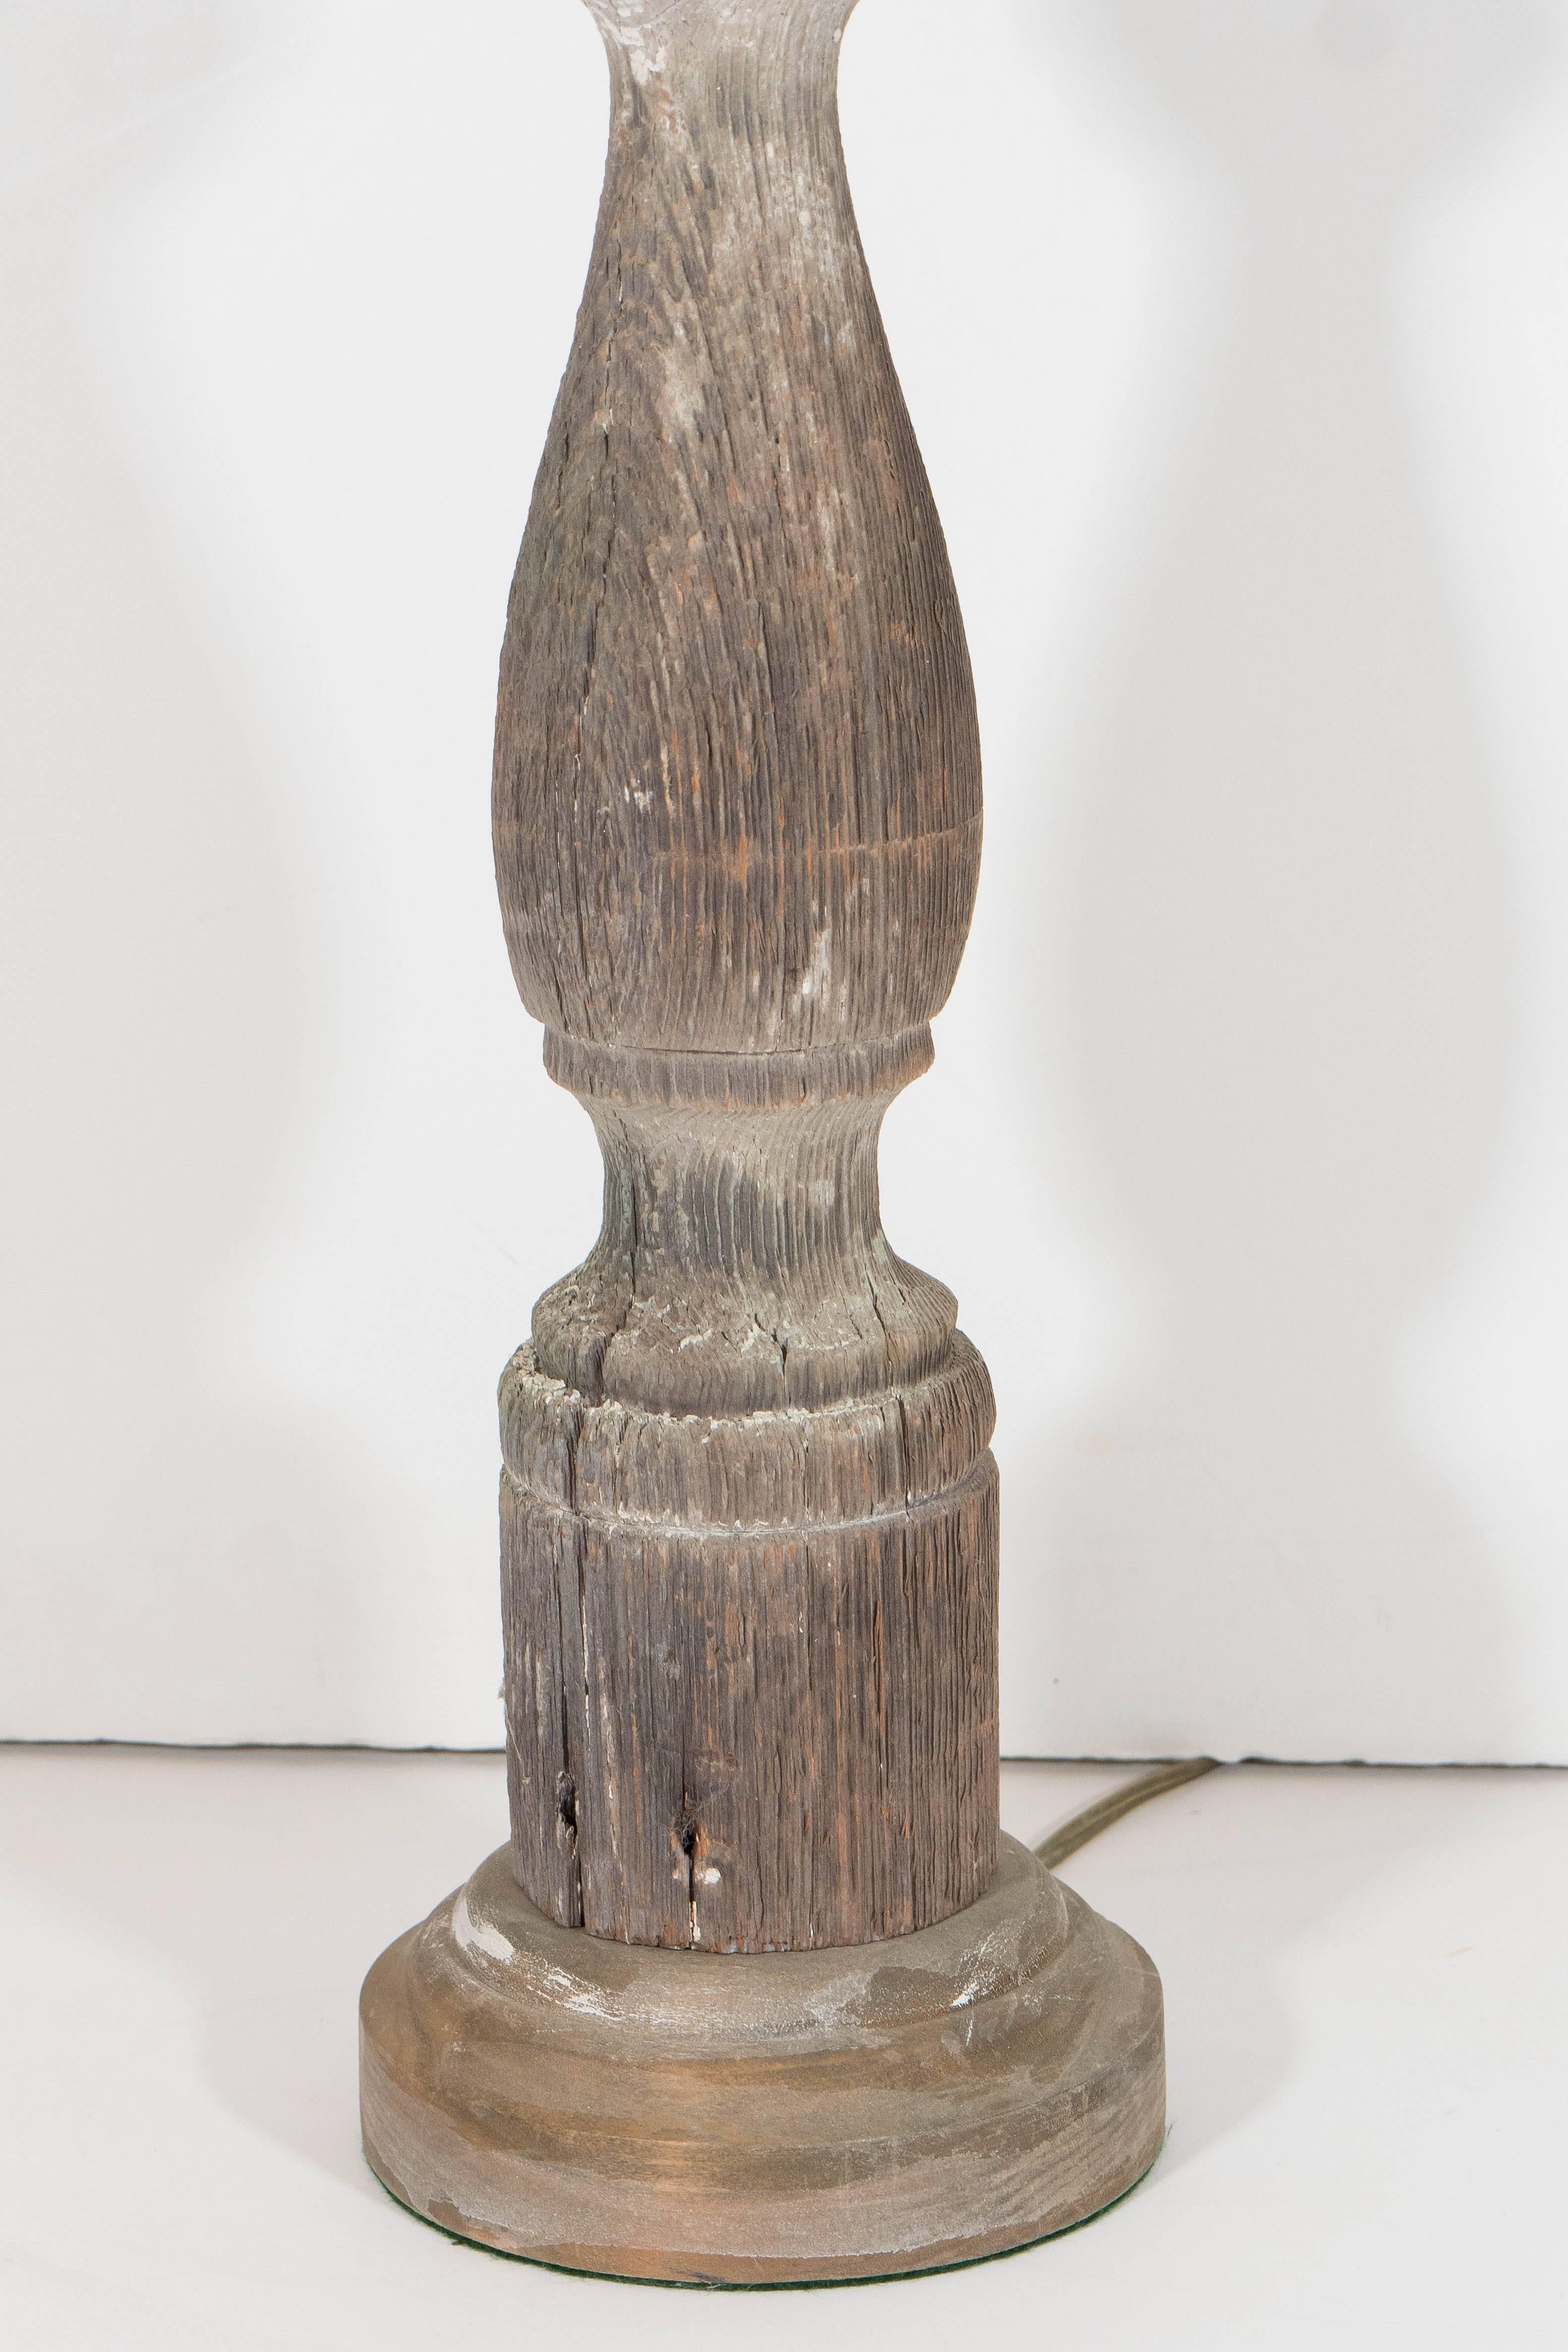 A pair of table lamps, with antique baluster bodies in wood; originally produced circa 1900s, the balusters have been remade as lamps, each retaining a beautifully weathered appearance. Wiring to US standard, each requires a single Edison base bulb.